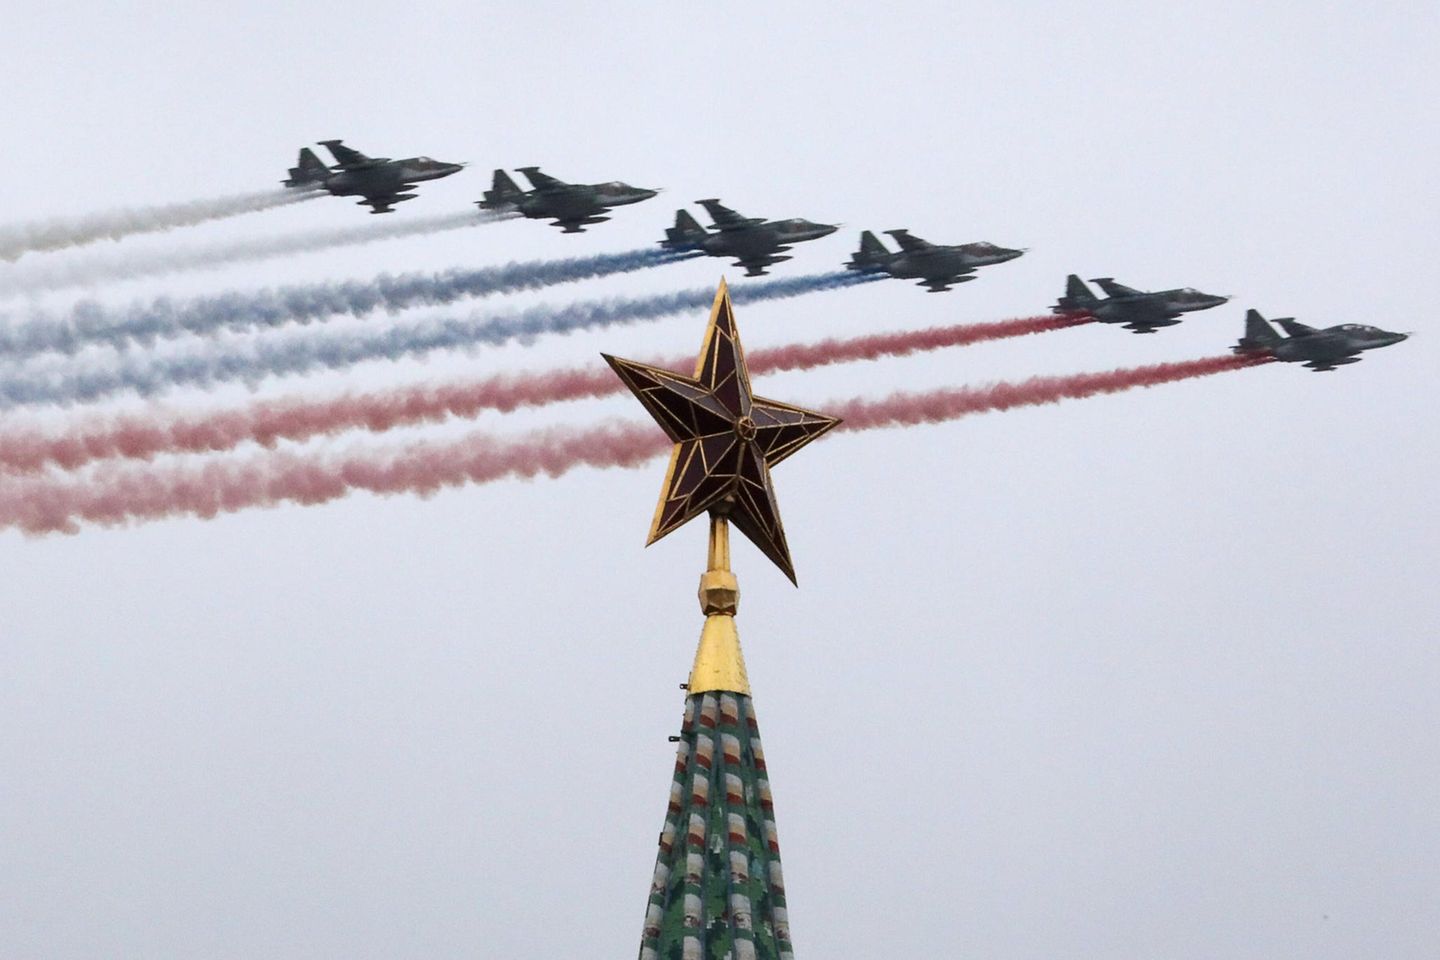 Sukhoi Su-25BM jet aircraft leave a trail in the Russian national colours as they fly in formation by a Moscow Kremlin tower during a Victory Day air show marking the 76th anniversary of the victory over Nazi Germany in the World War II.